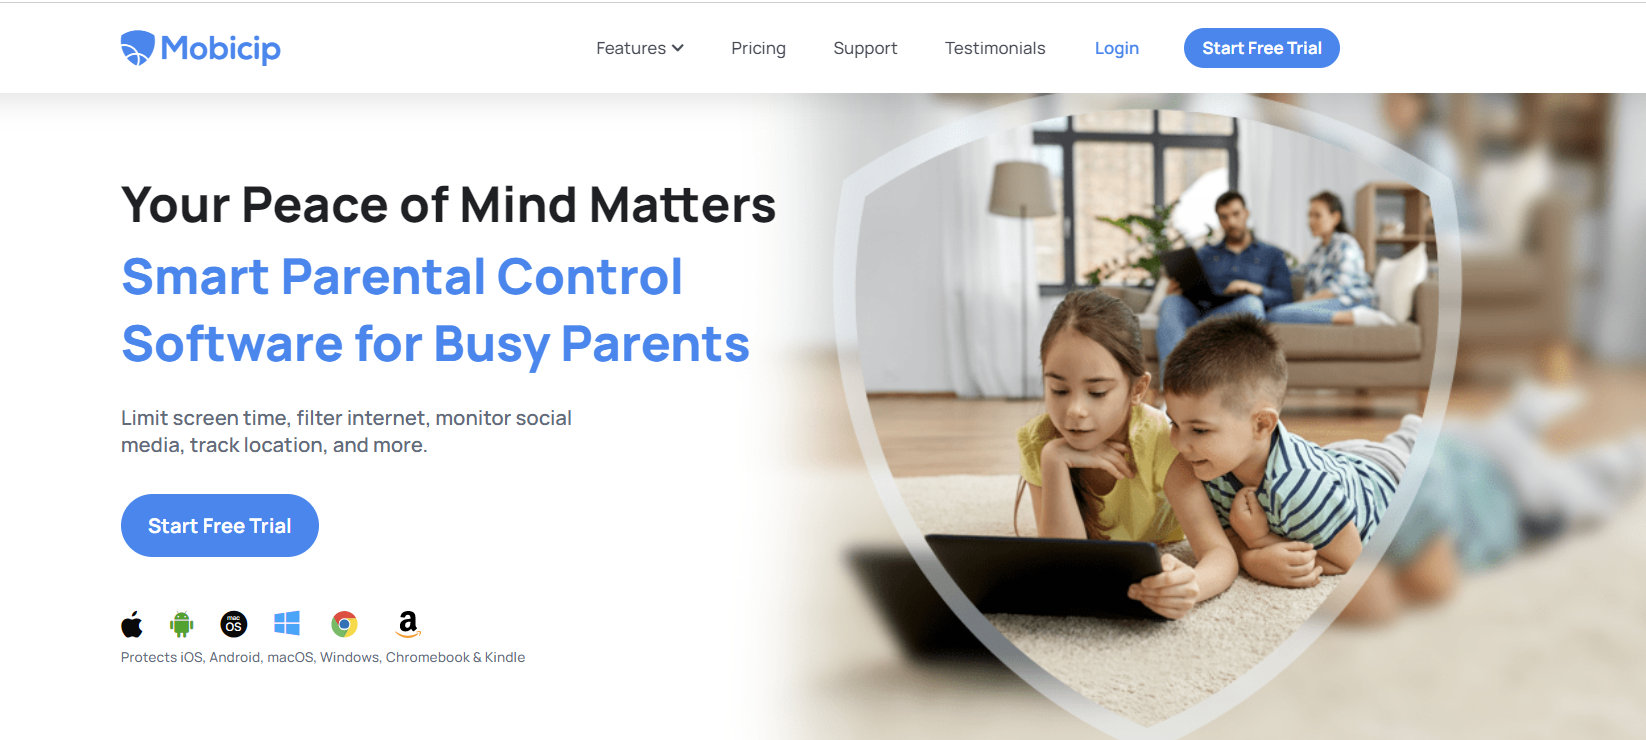 Mobicip is yet another fantastic internet filtering software option for parents navigating the internet era with their children.